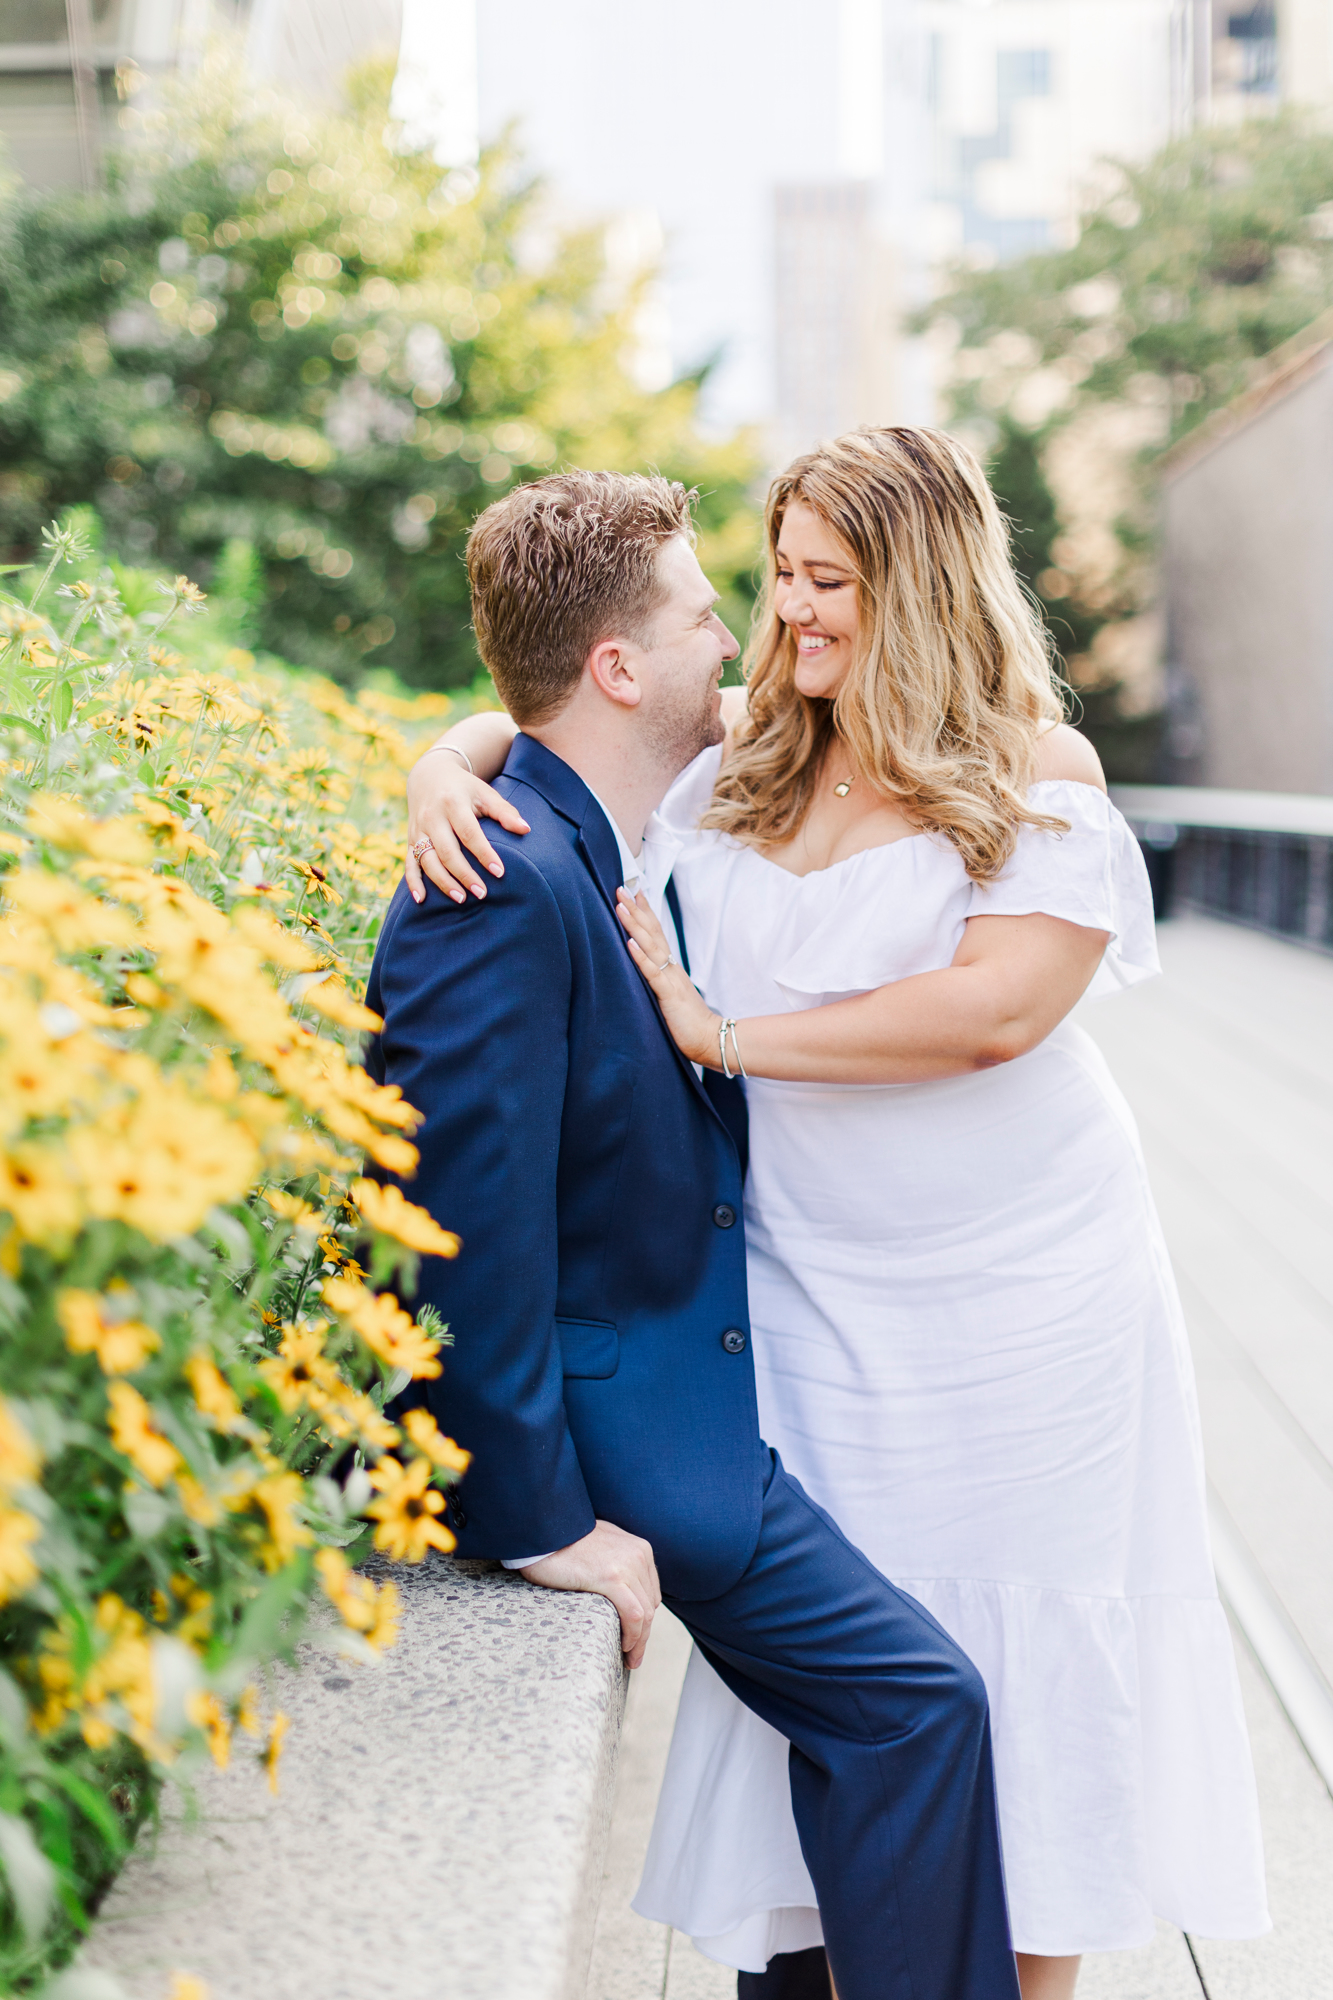 Whimsical engagement shoot on the high line